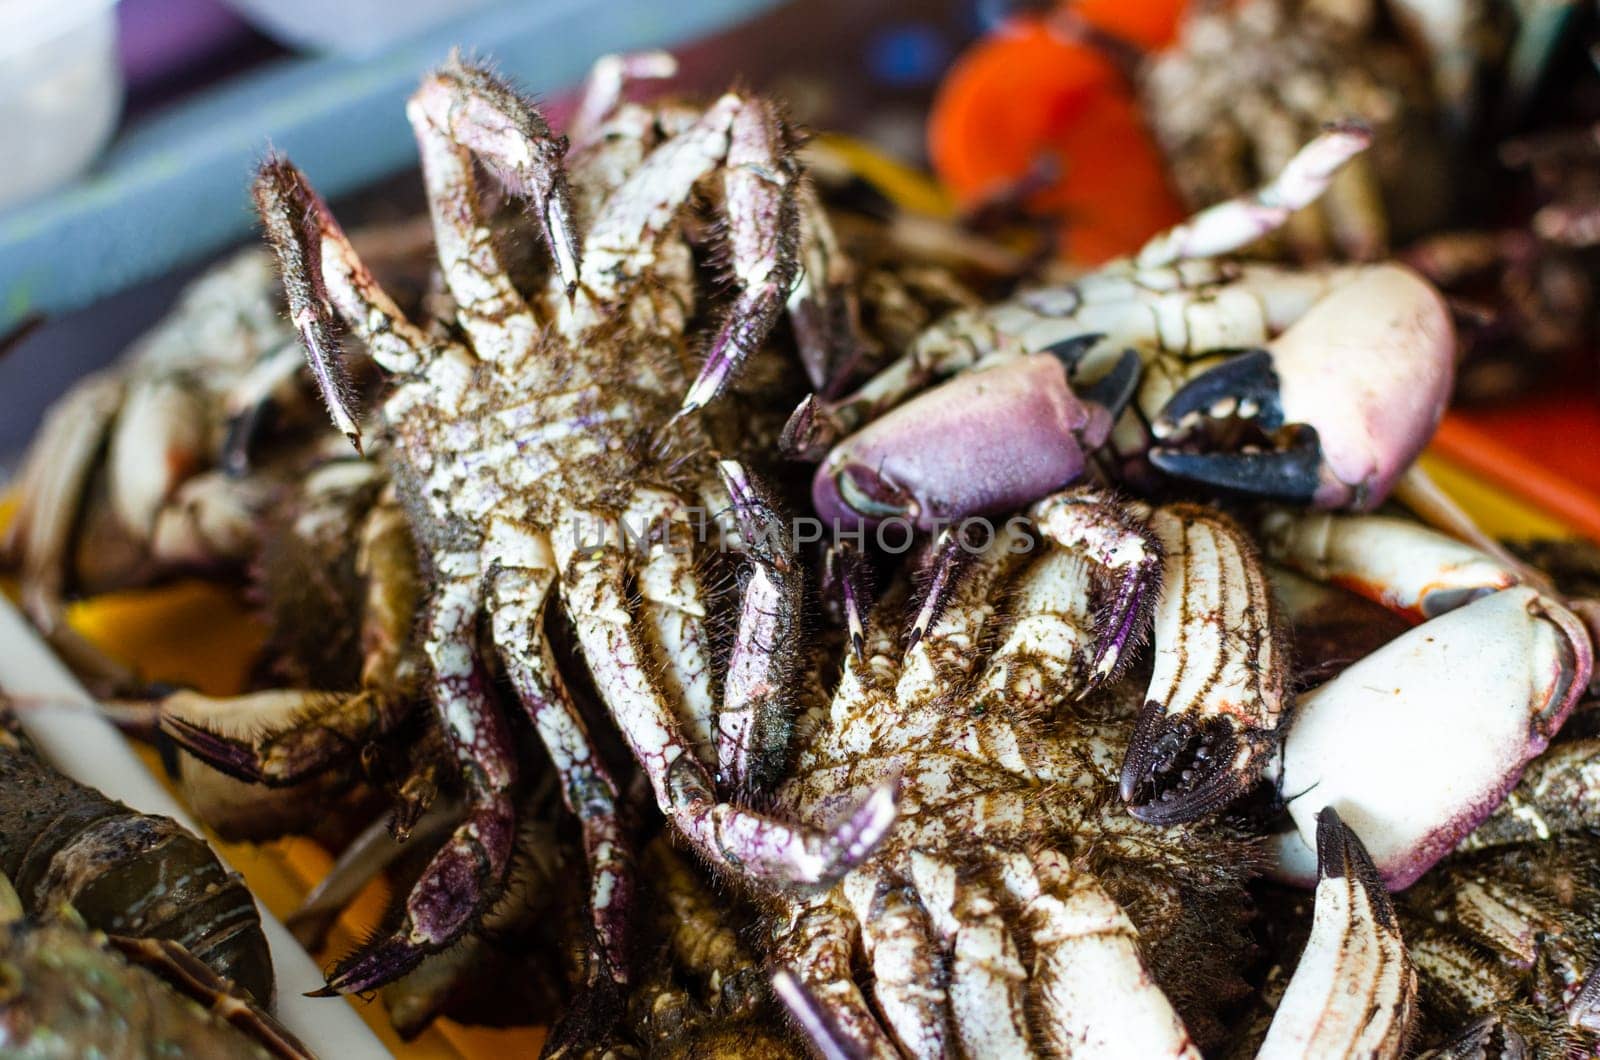 Large group of alive sea crabs bundled for sale at supermarket. by Peruphotoart